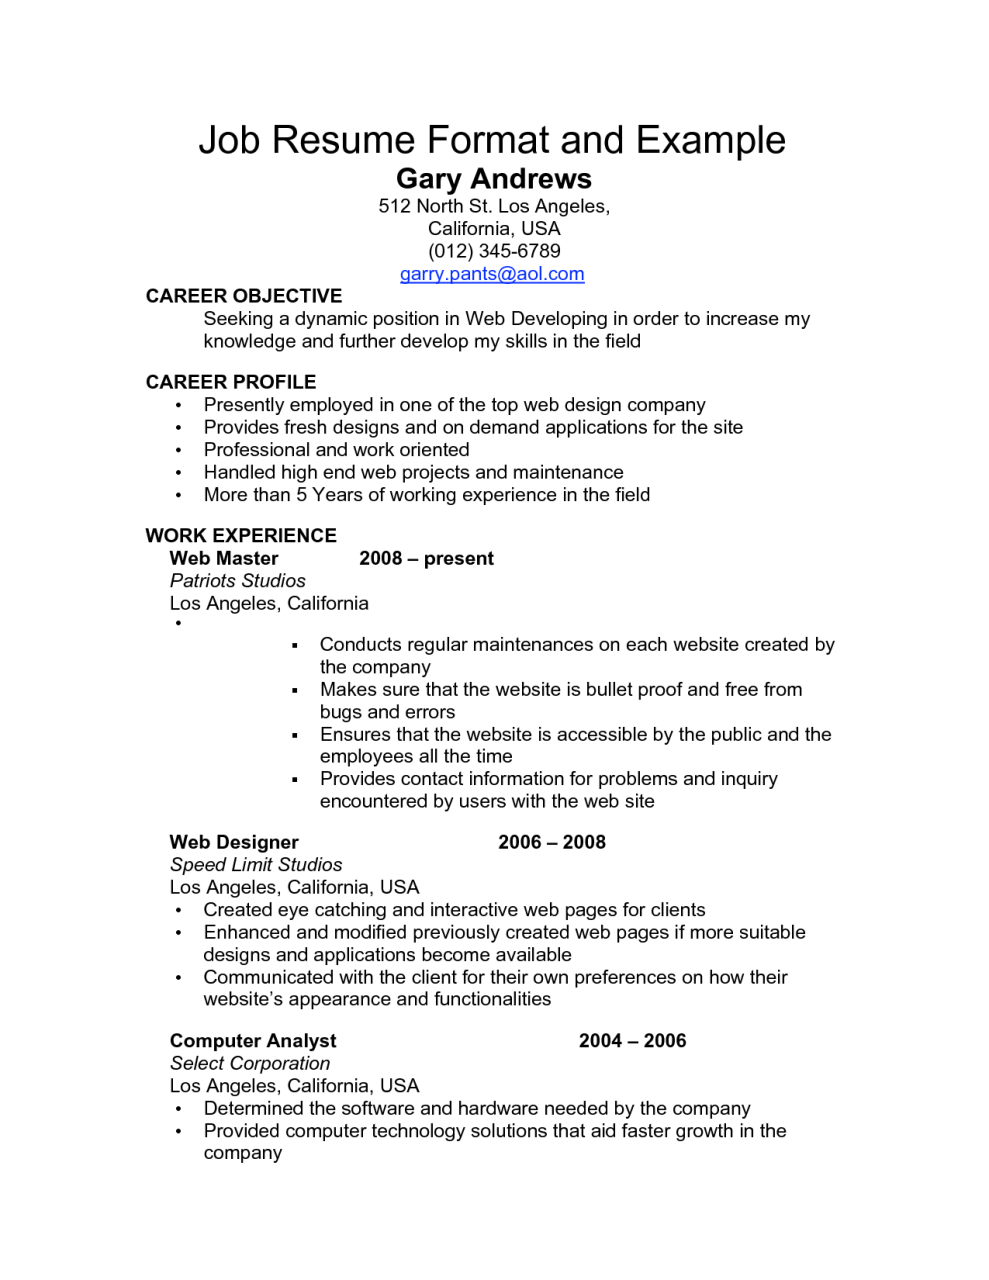 Example Of Resume To Apply Job In Company